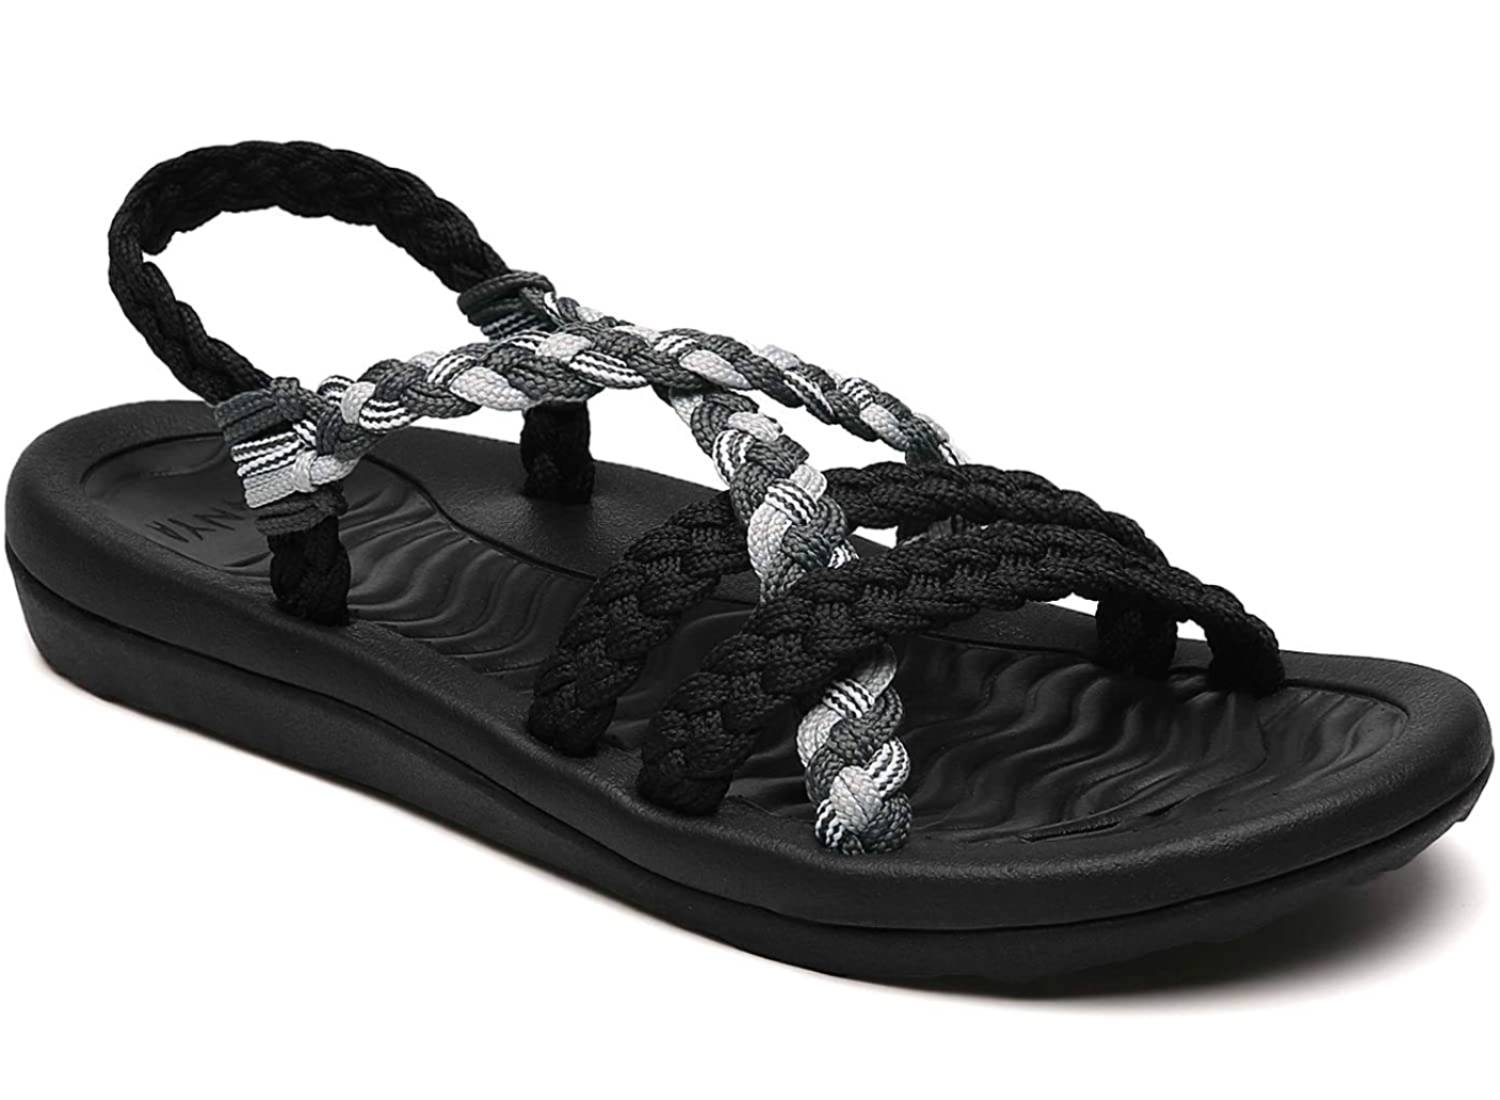 A black and grey braided sandal with all black soles